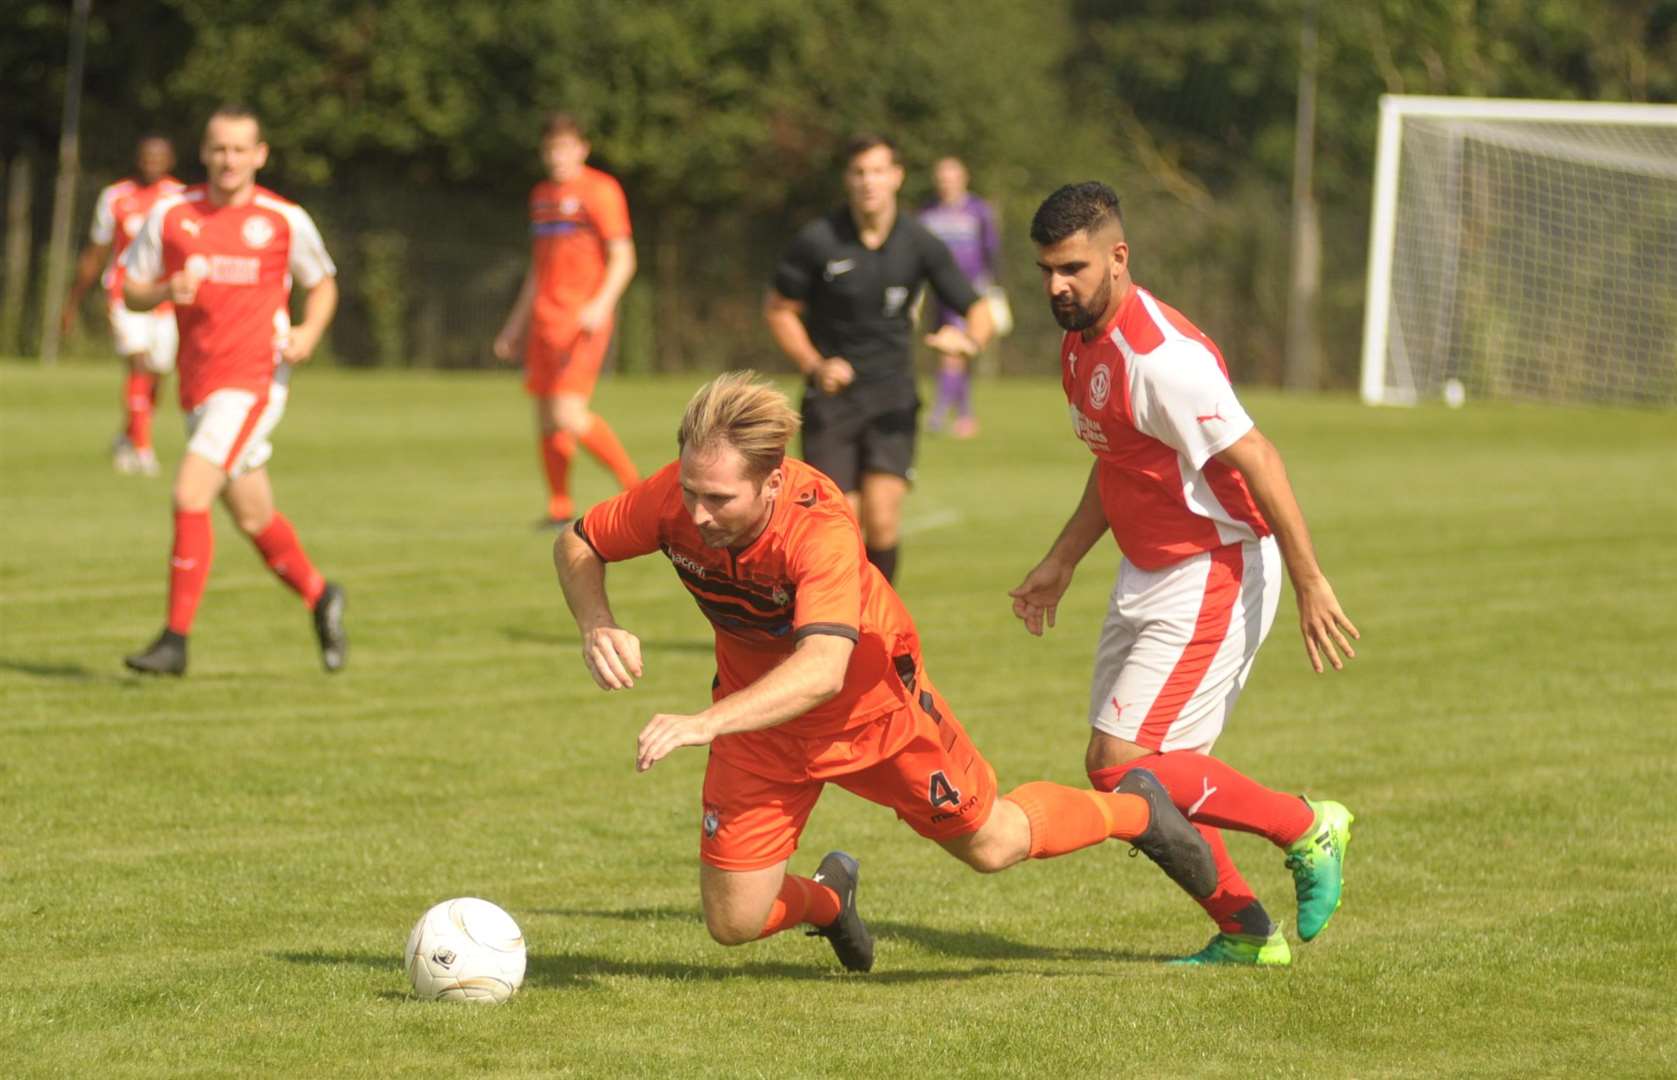 Action from the 2-2 draw between Lordswood (orange) and Punjab (red) Picture: Steve Crispe